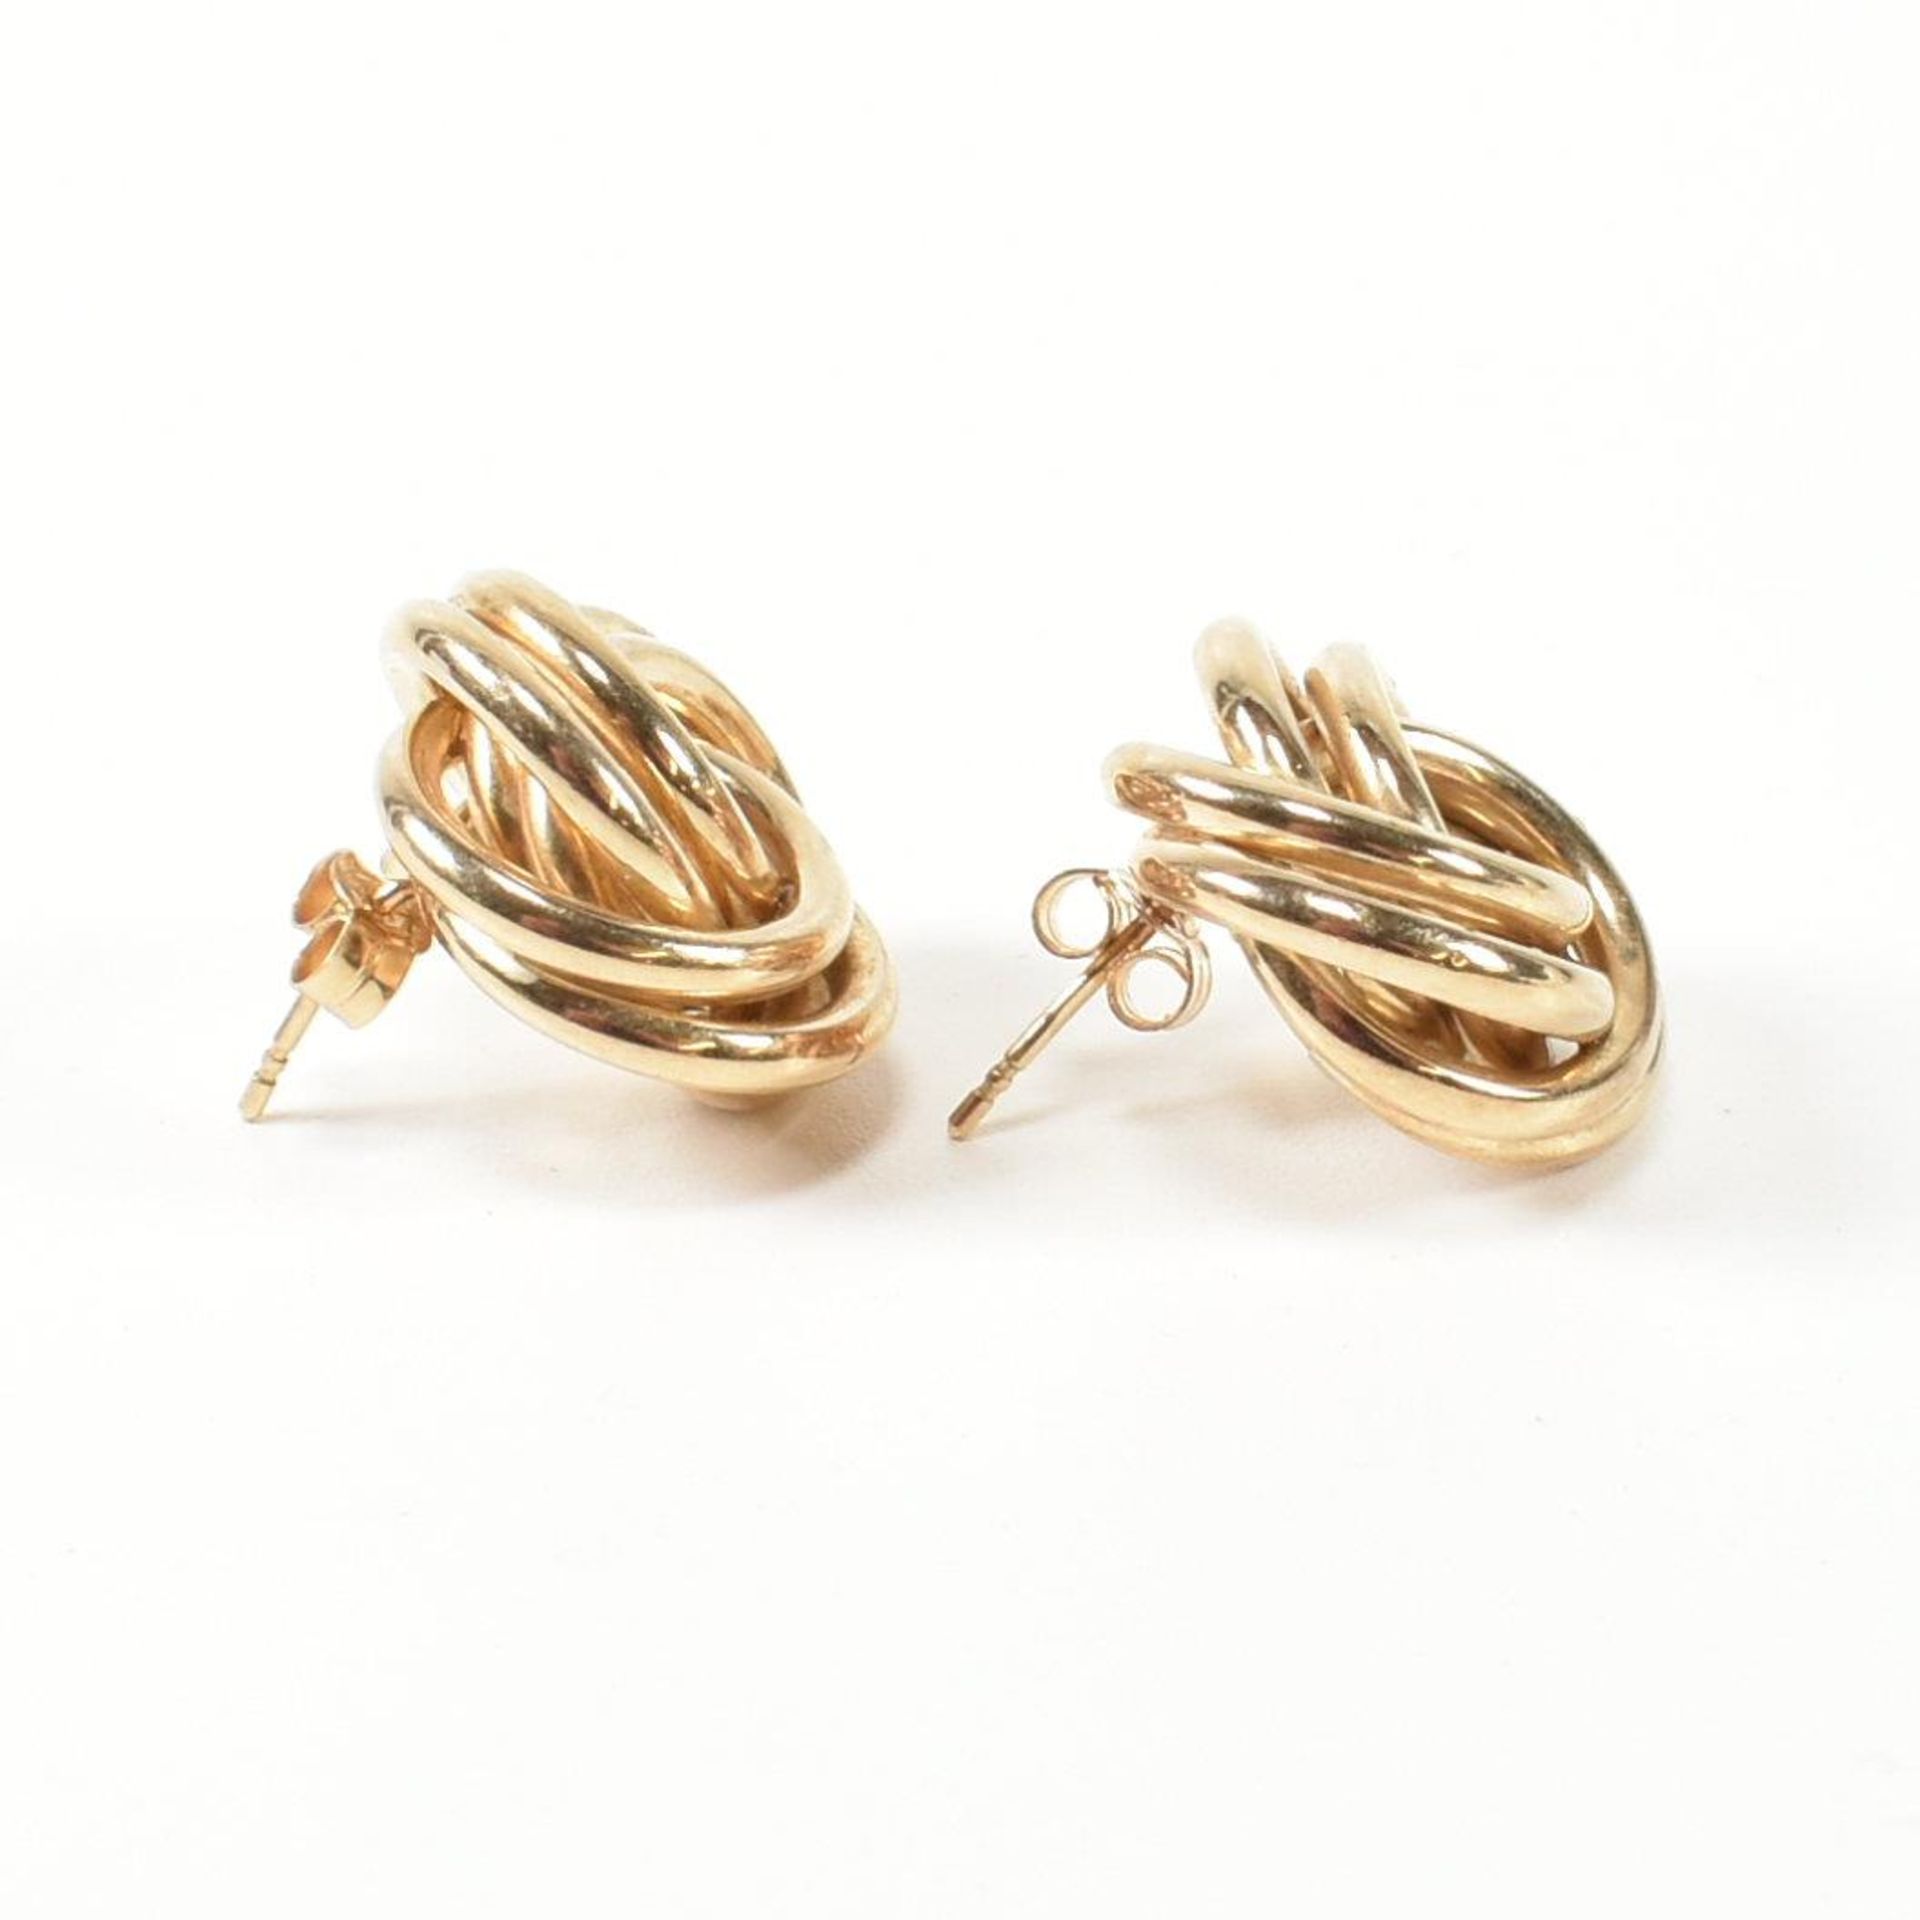 PAIR OF HALLMARKED 9CT GOLD KNOT STUD EARRINGS - Image 4 of 6